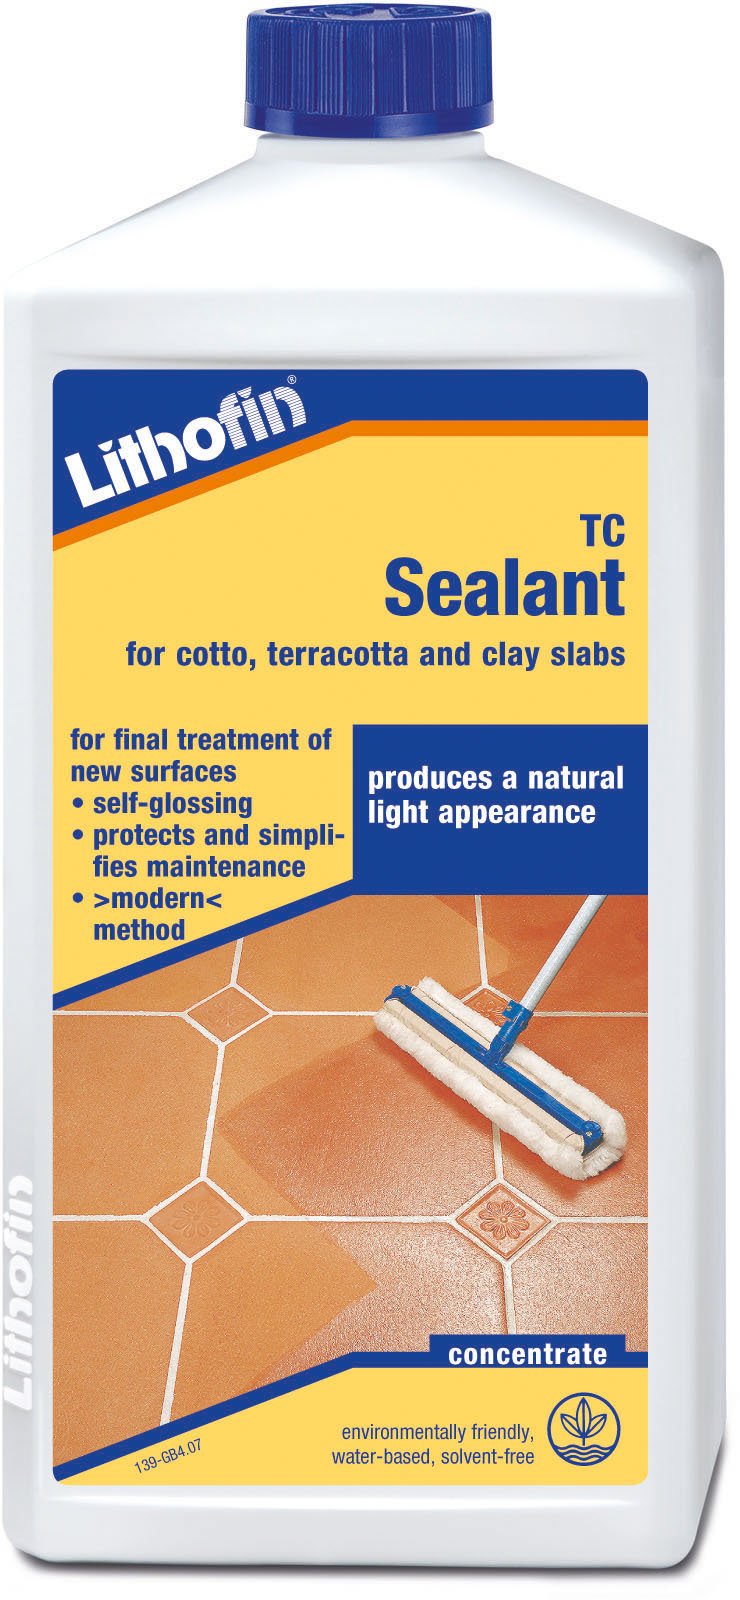 Lithofin sealant for cotto, terracotta and clay slabs 